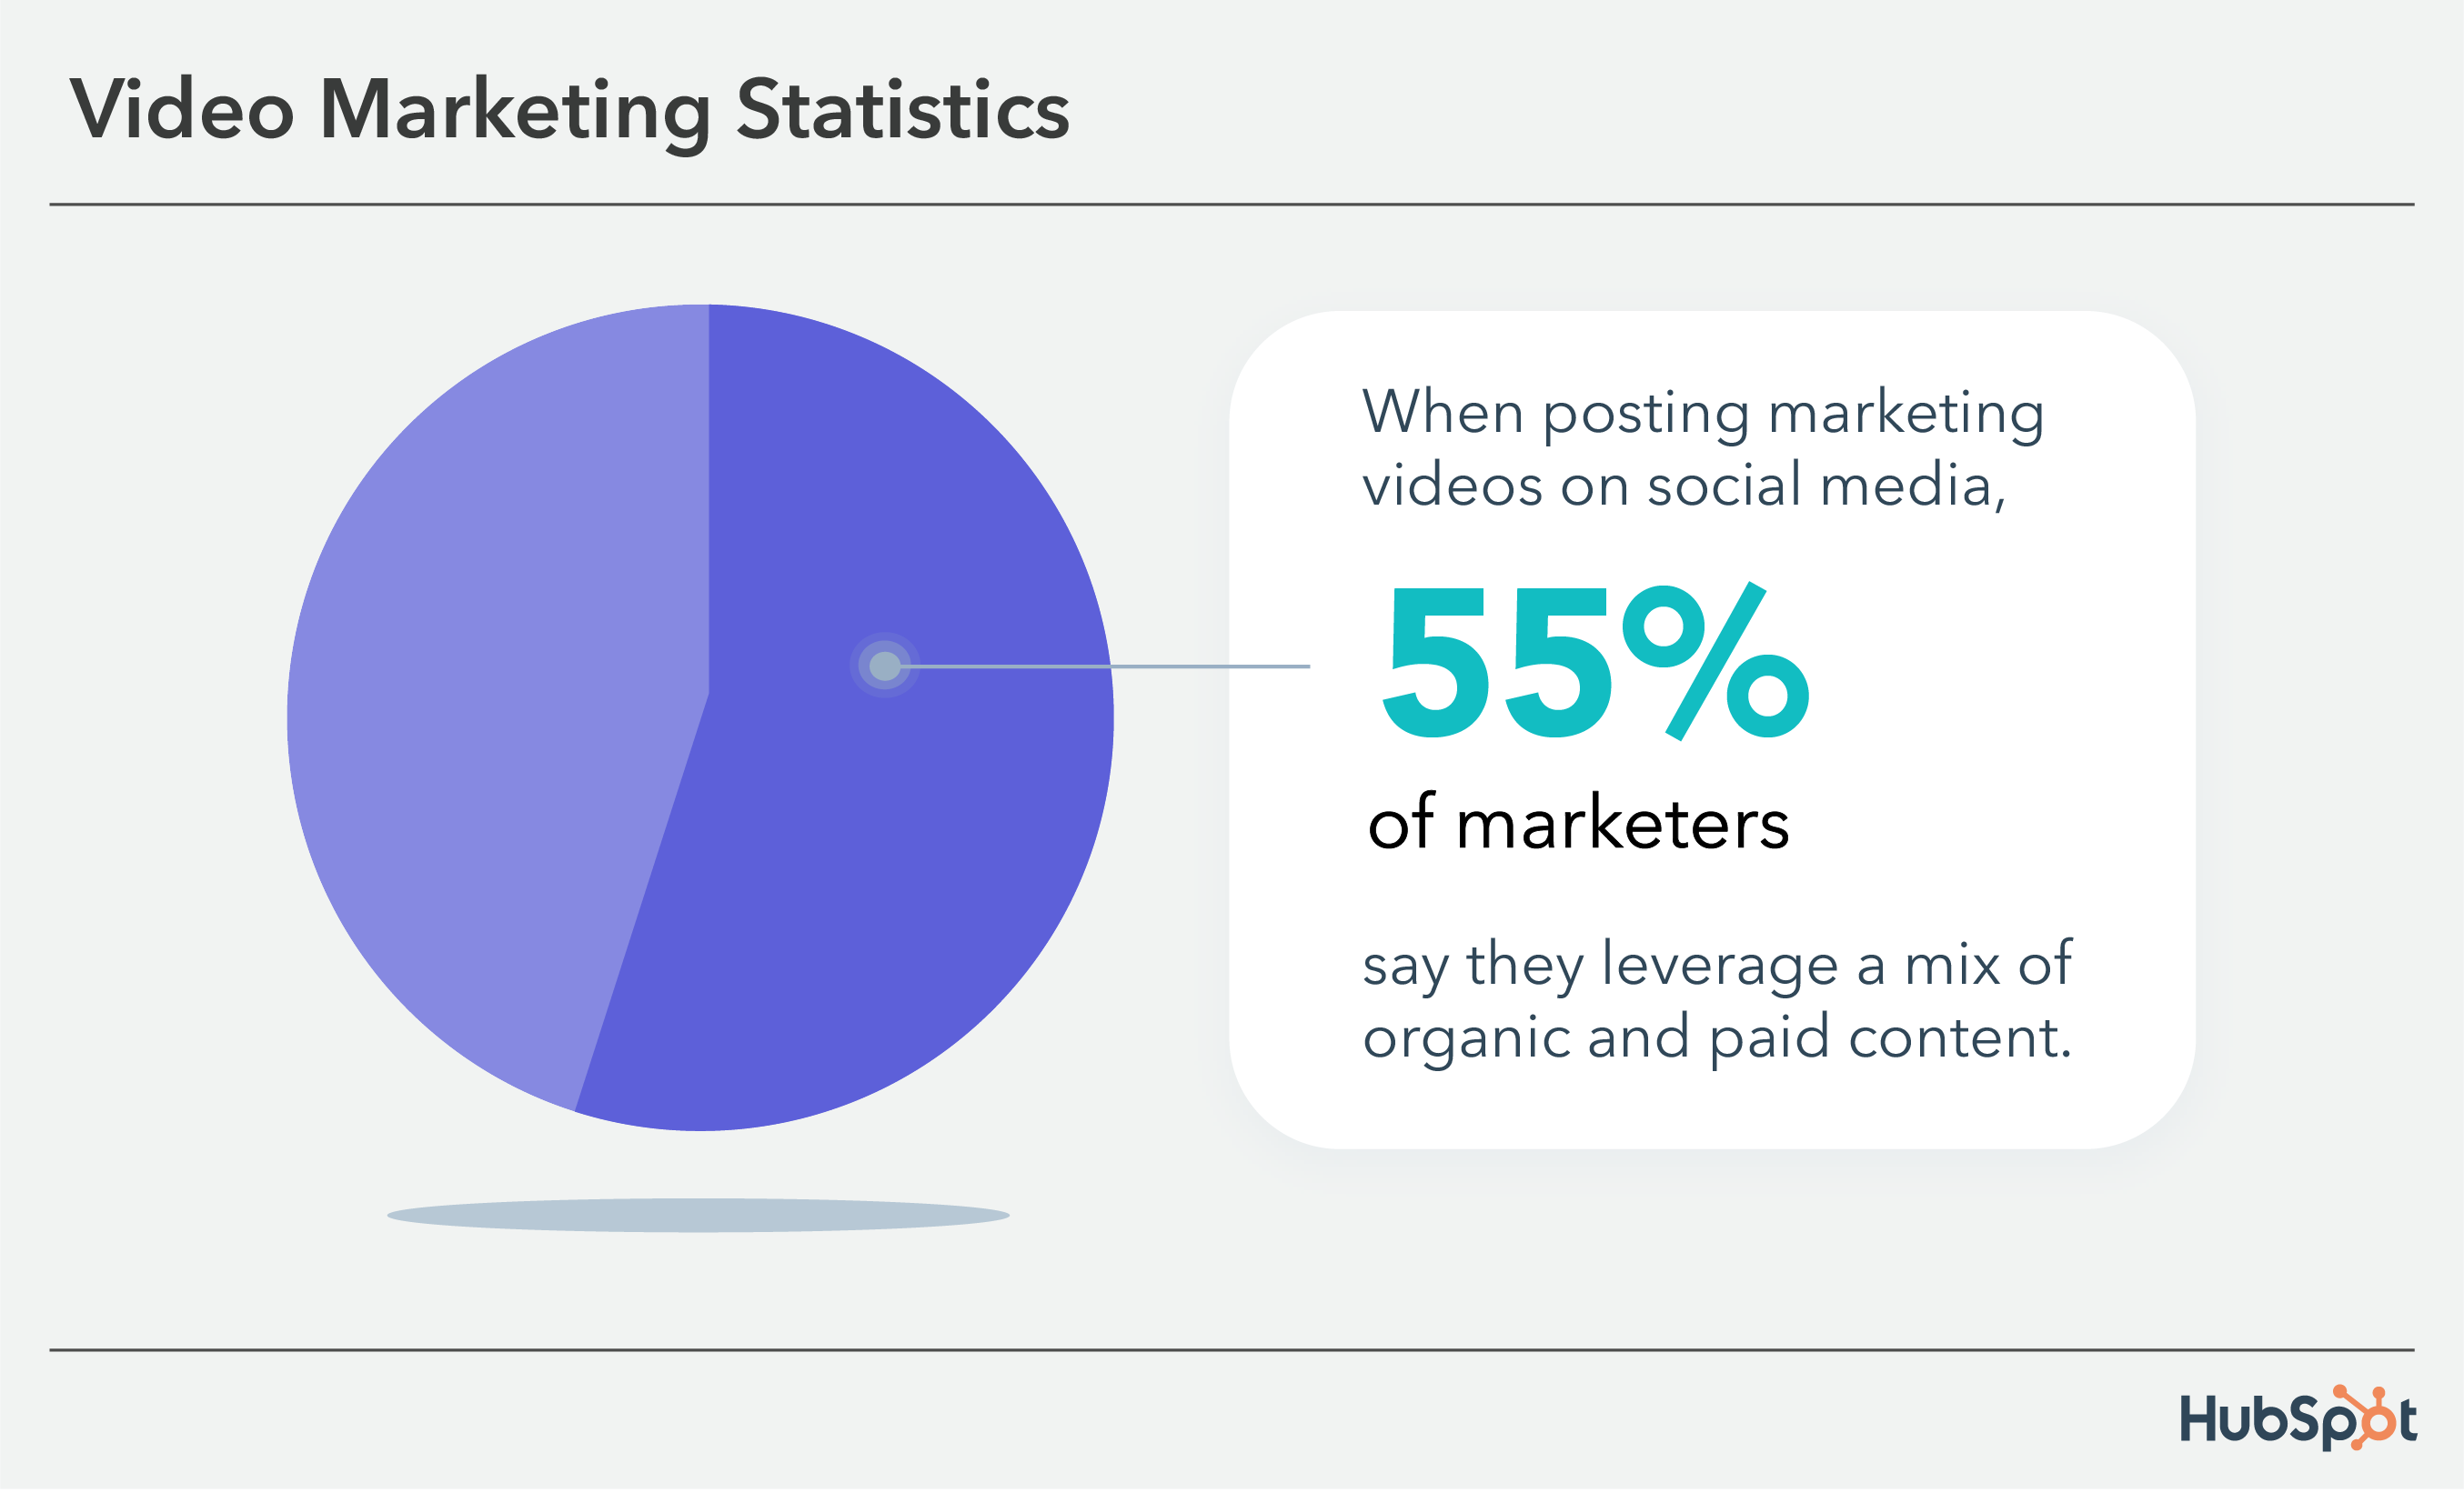 video marketing statistics: 55% of marketers use a mix of organic and paid content